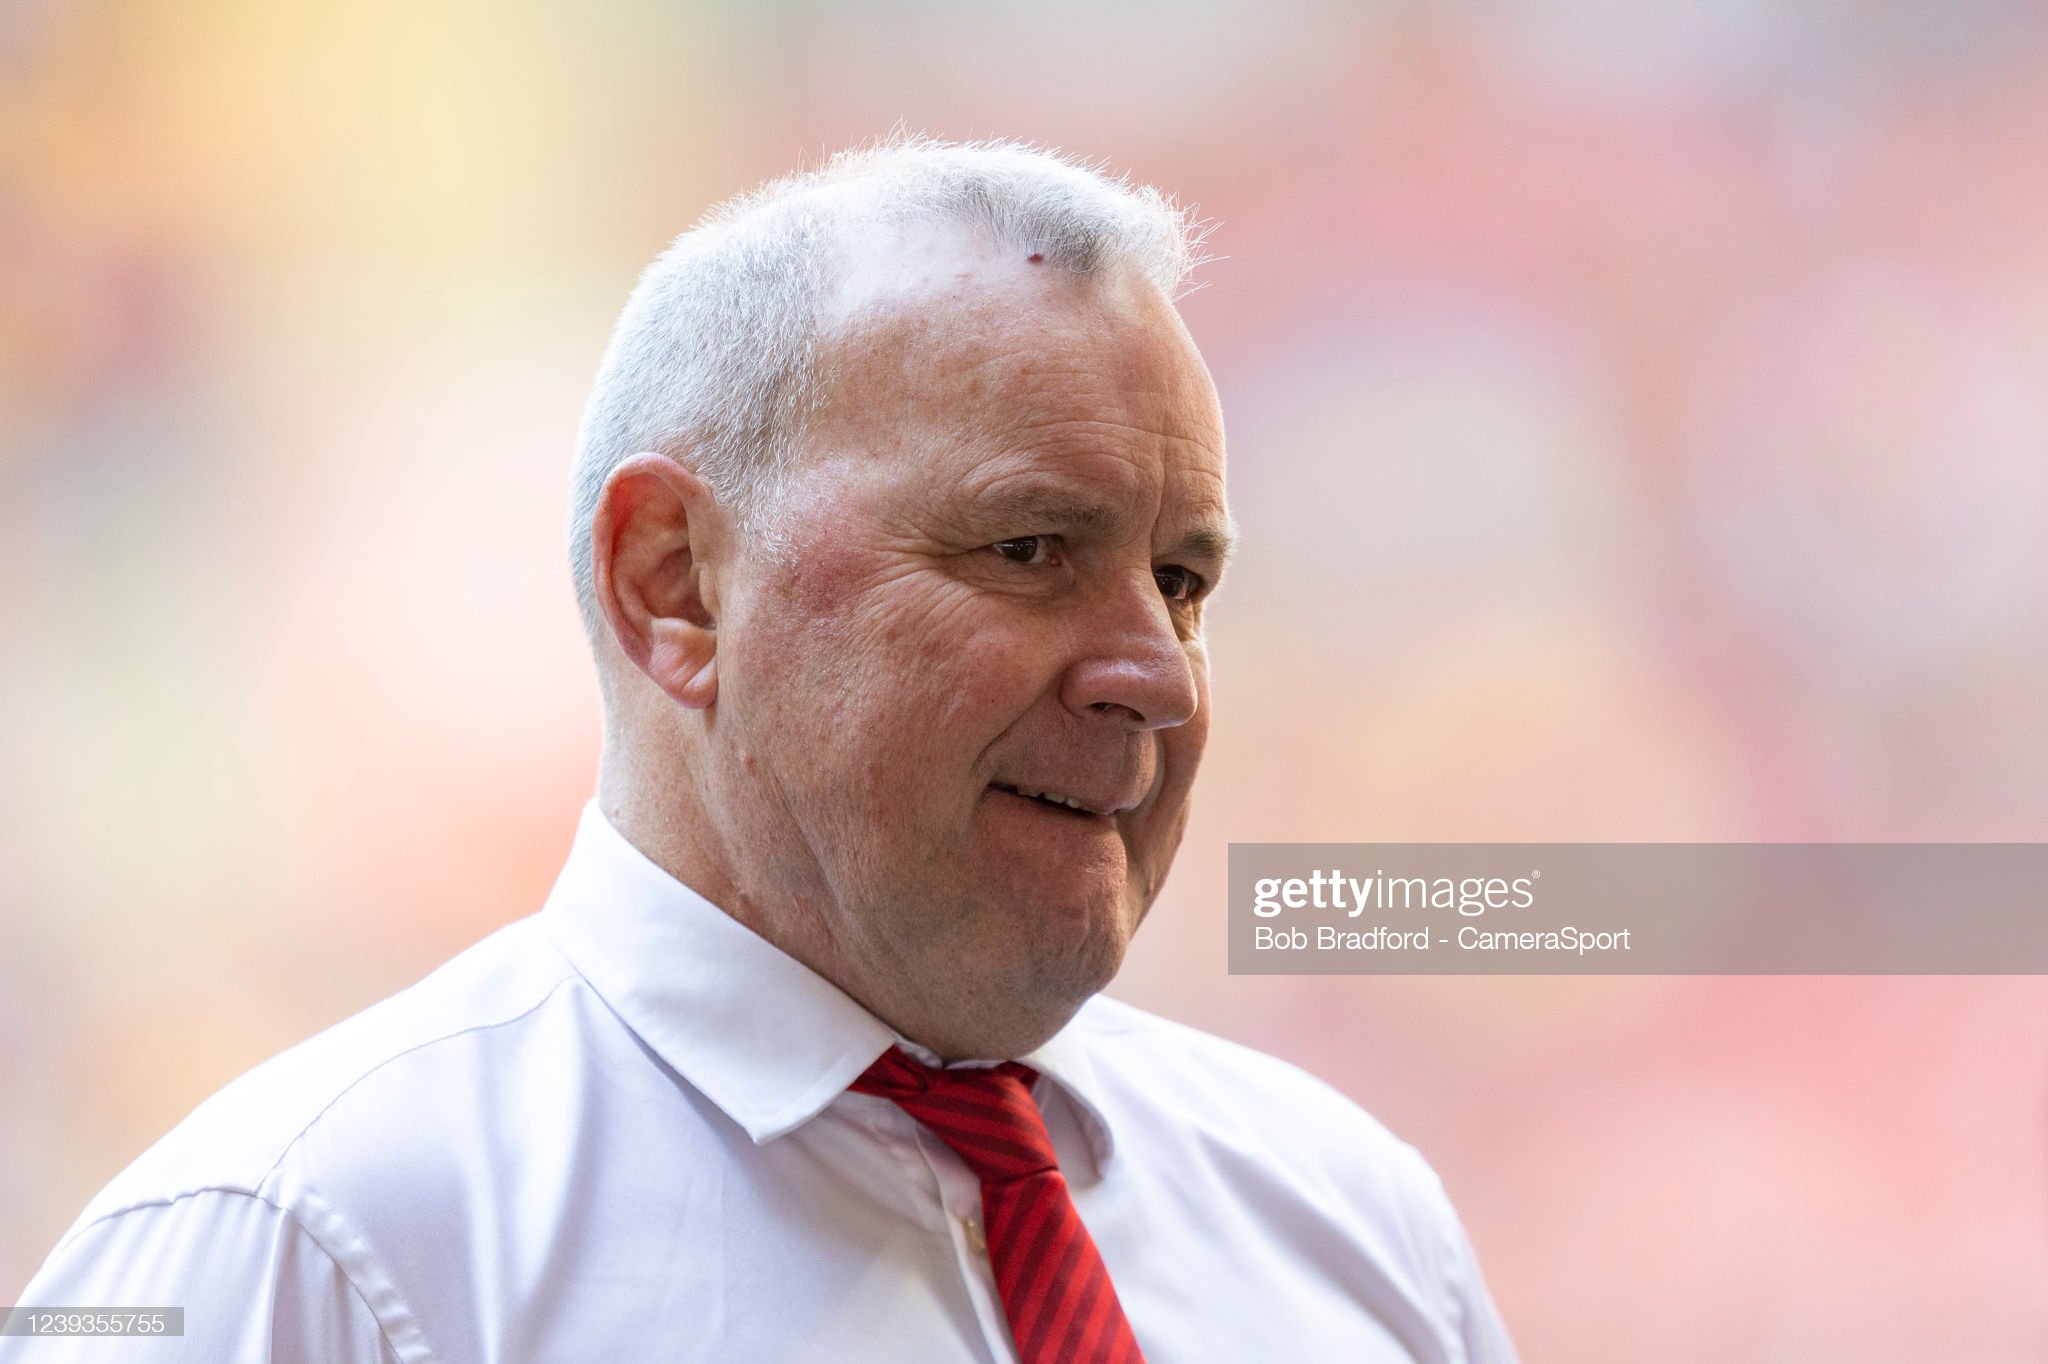 Wayne Pivac On Pride And The Prejudice Of Being Written Off Before Wales Face South Africa